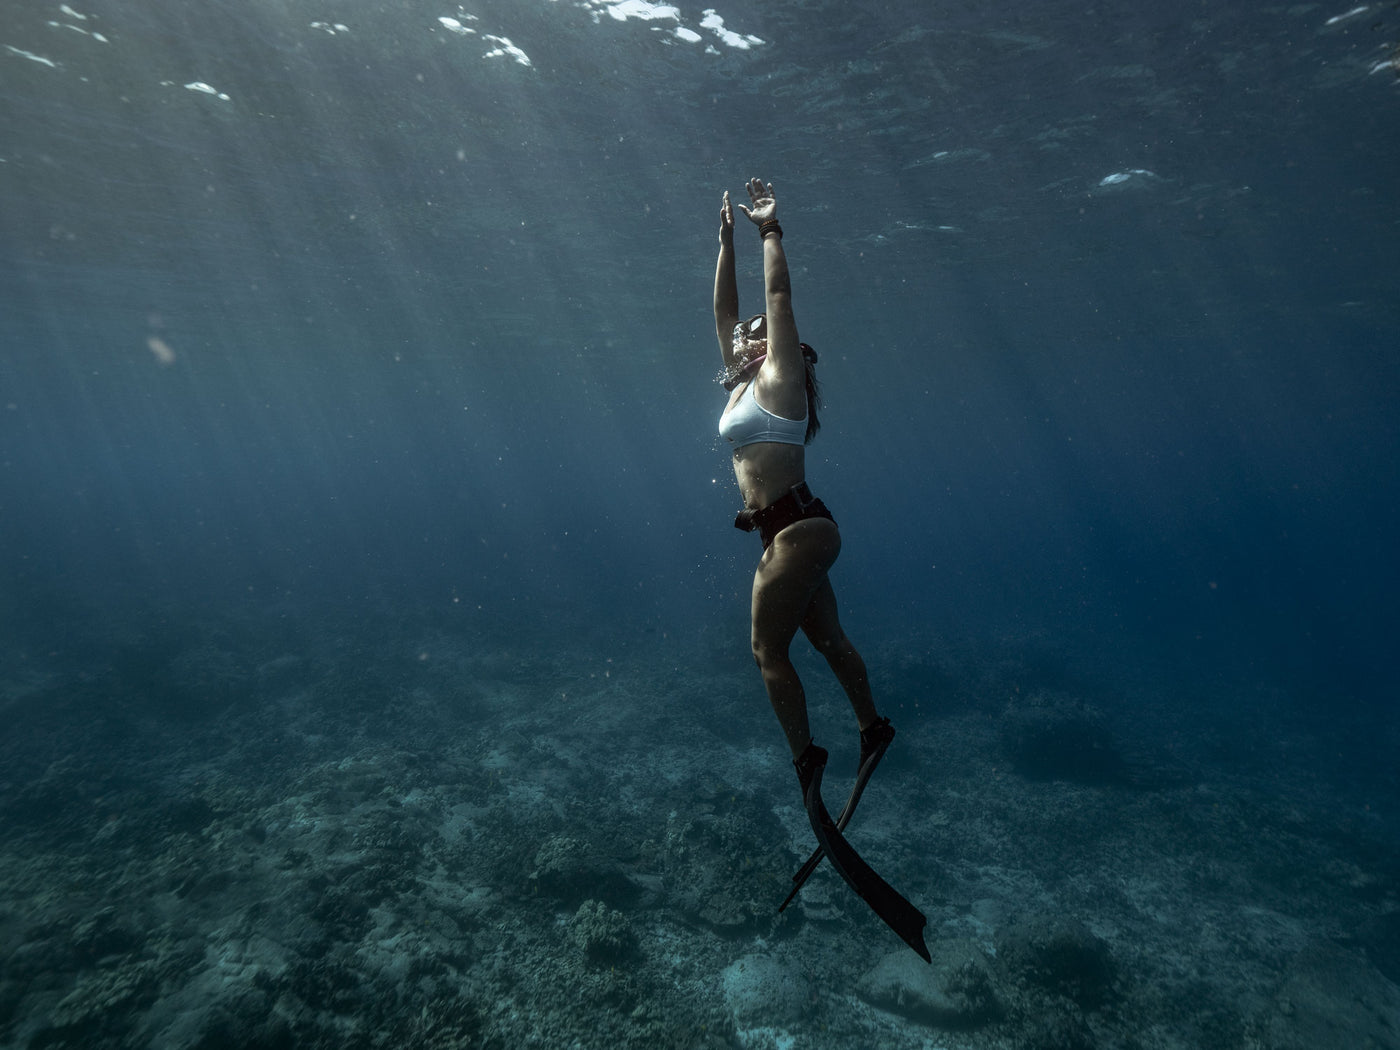 Discover Freediving